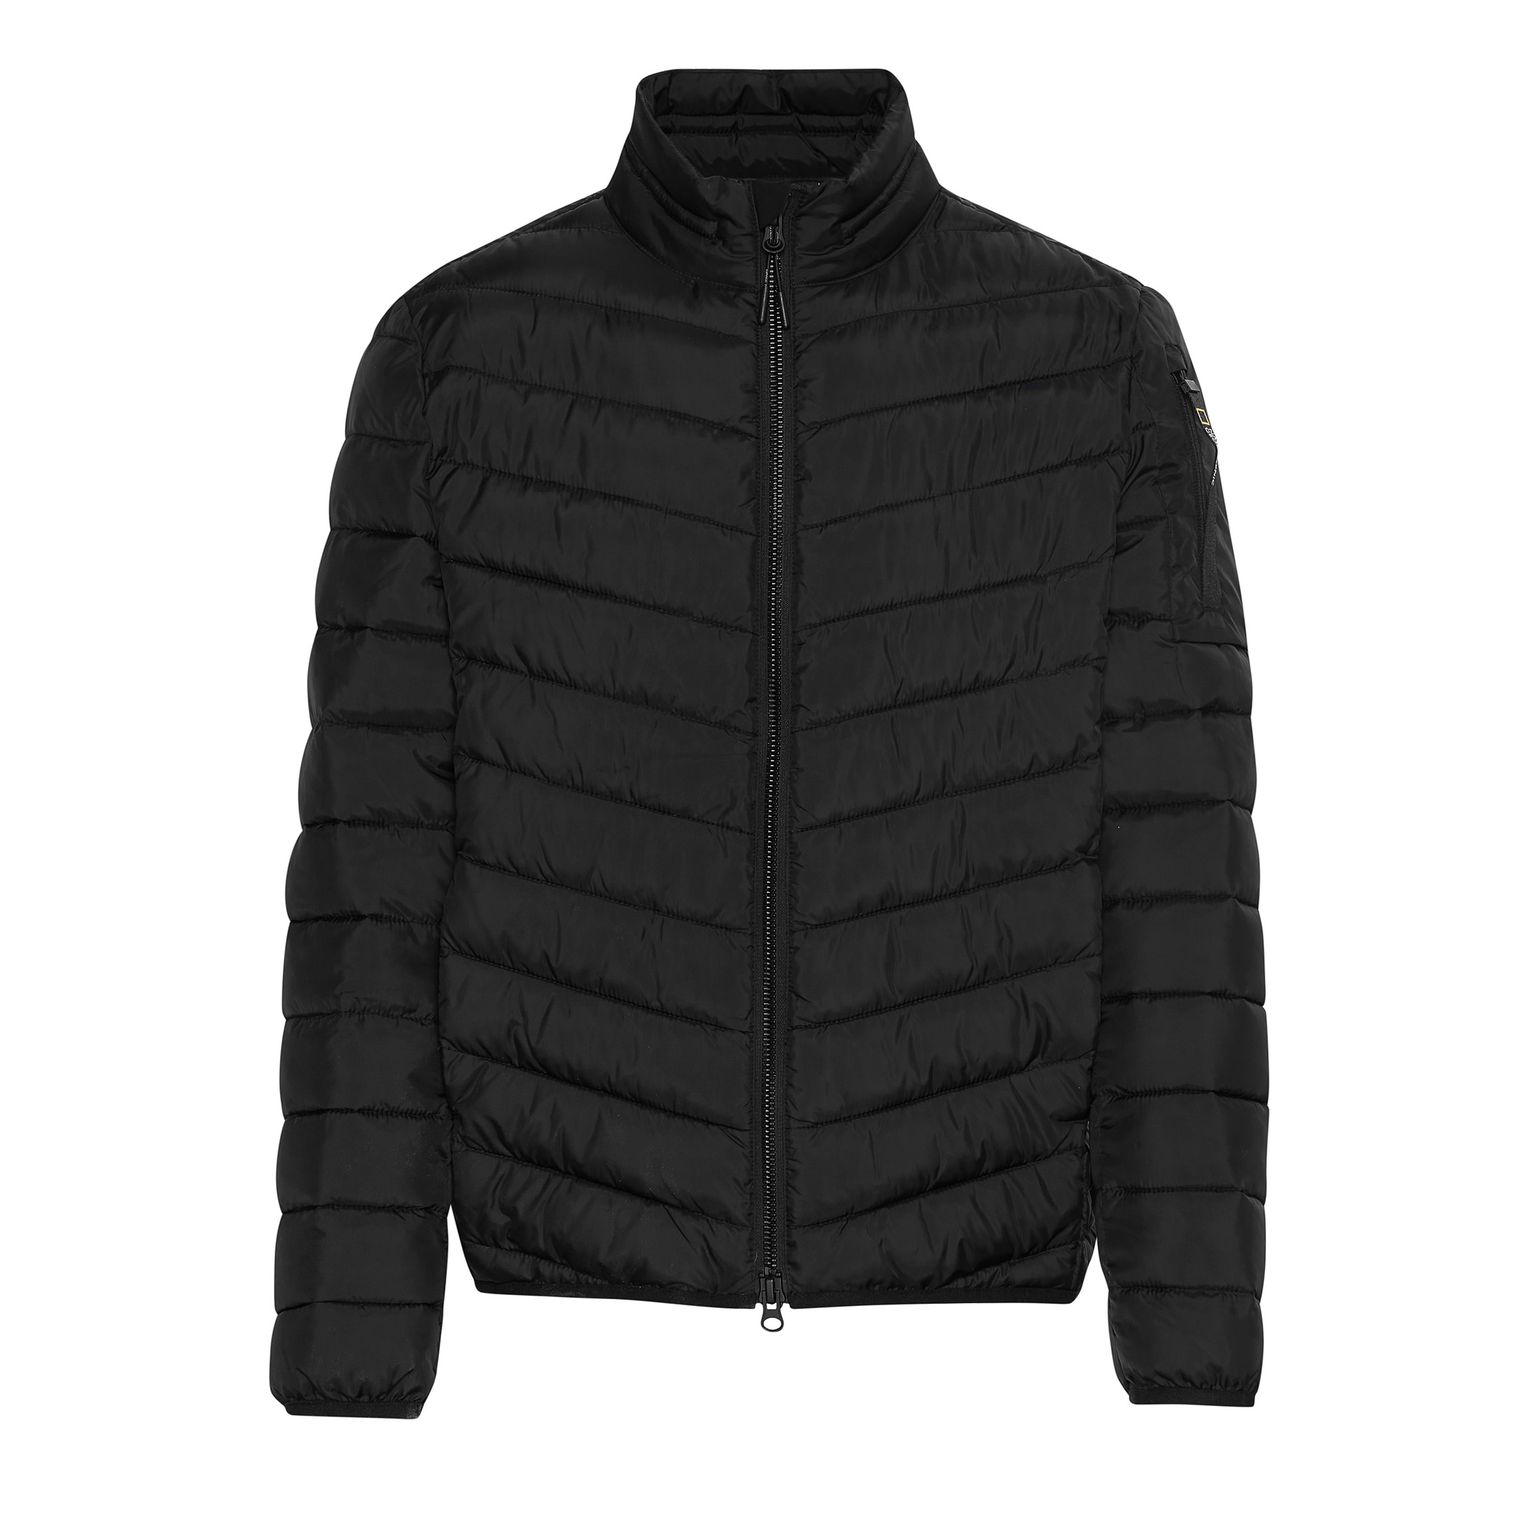 National Geographic Puffer Jacket        Black